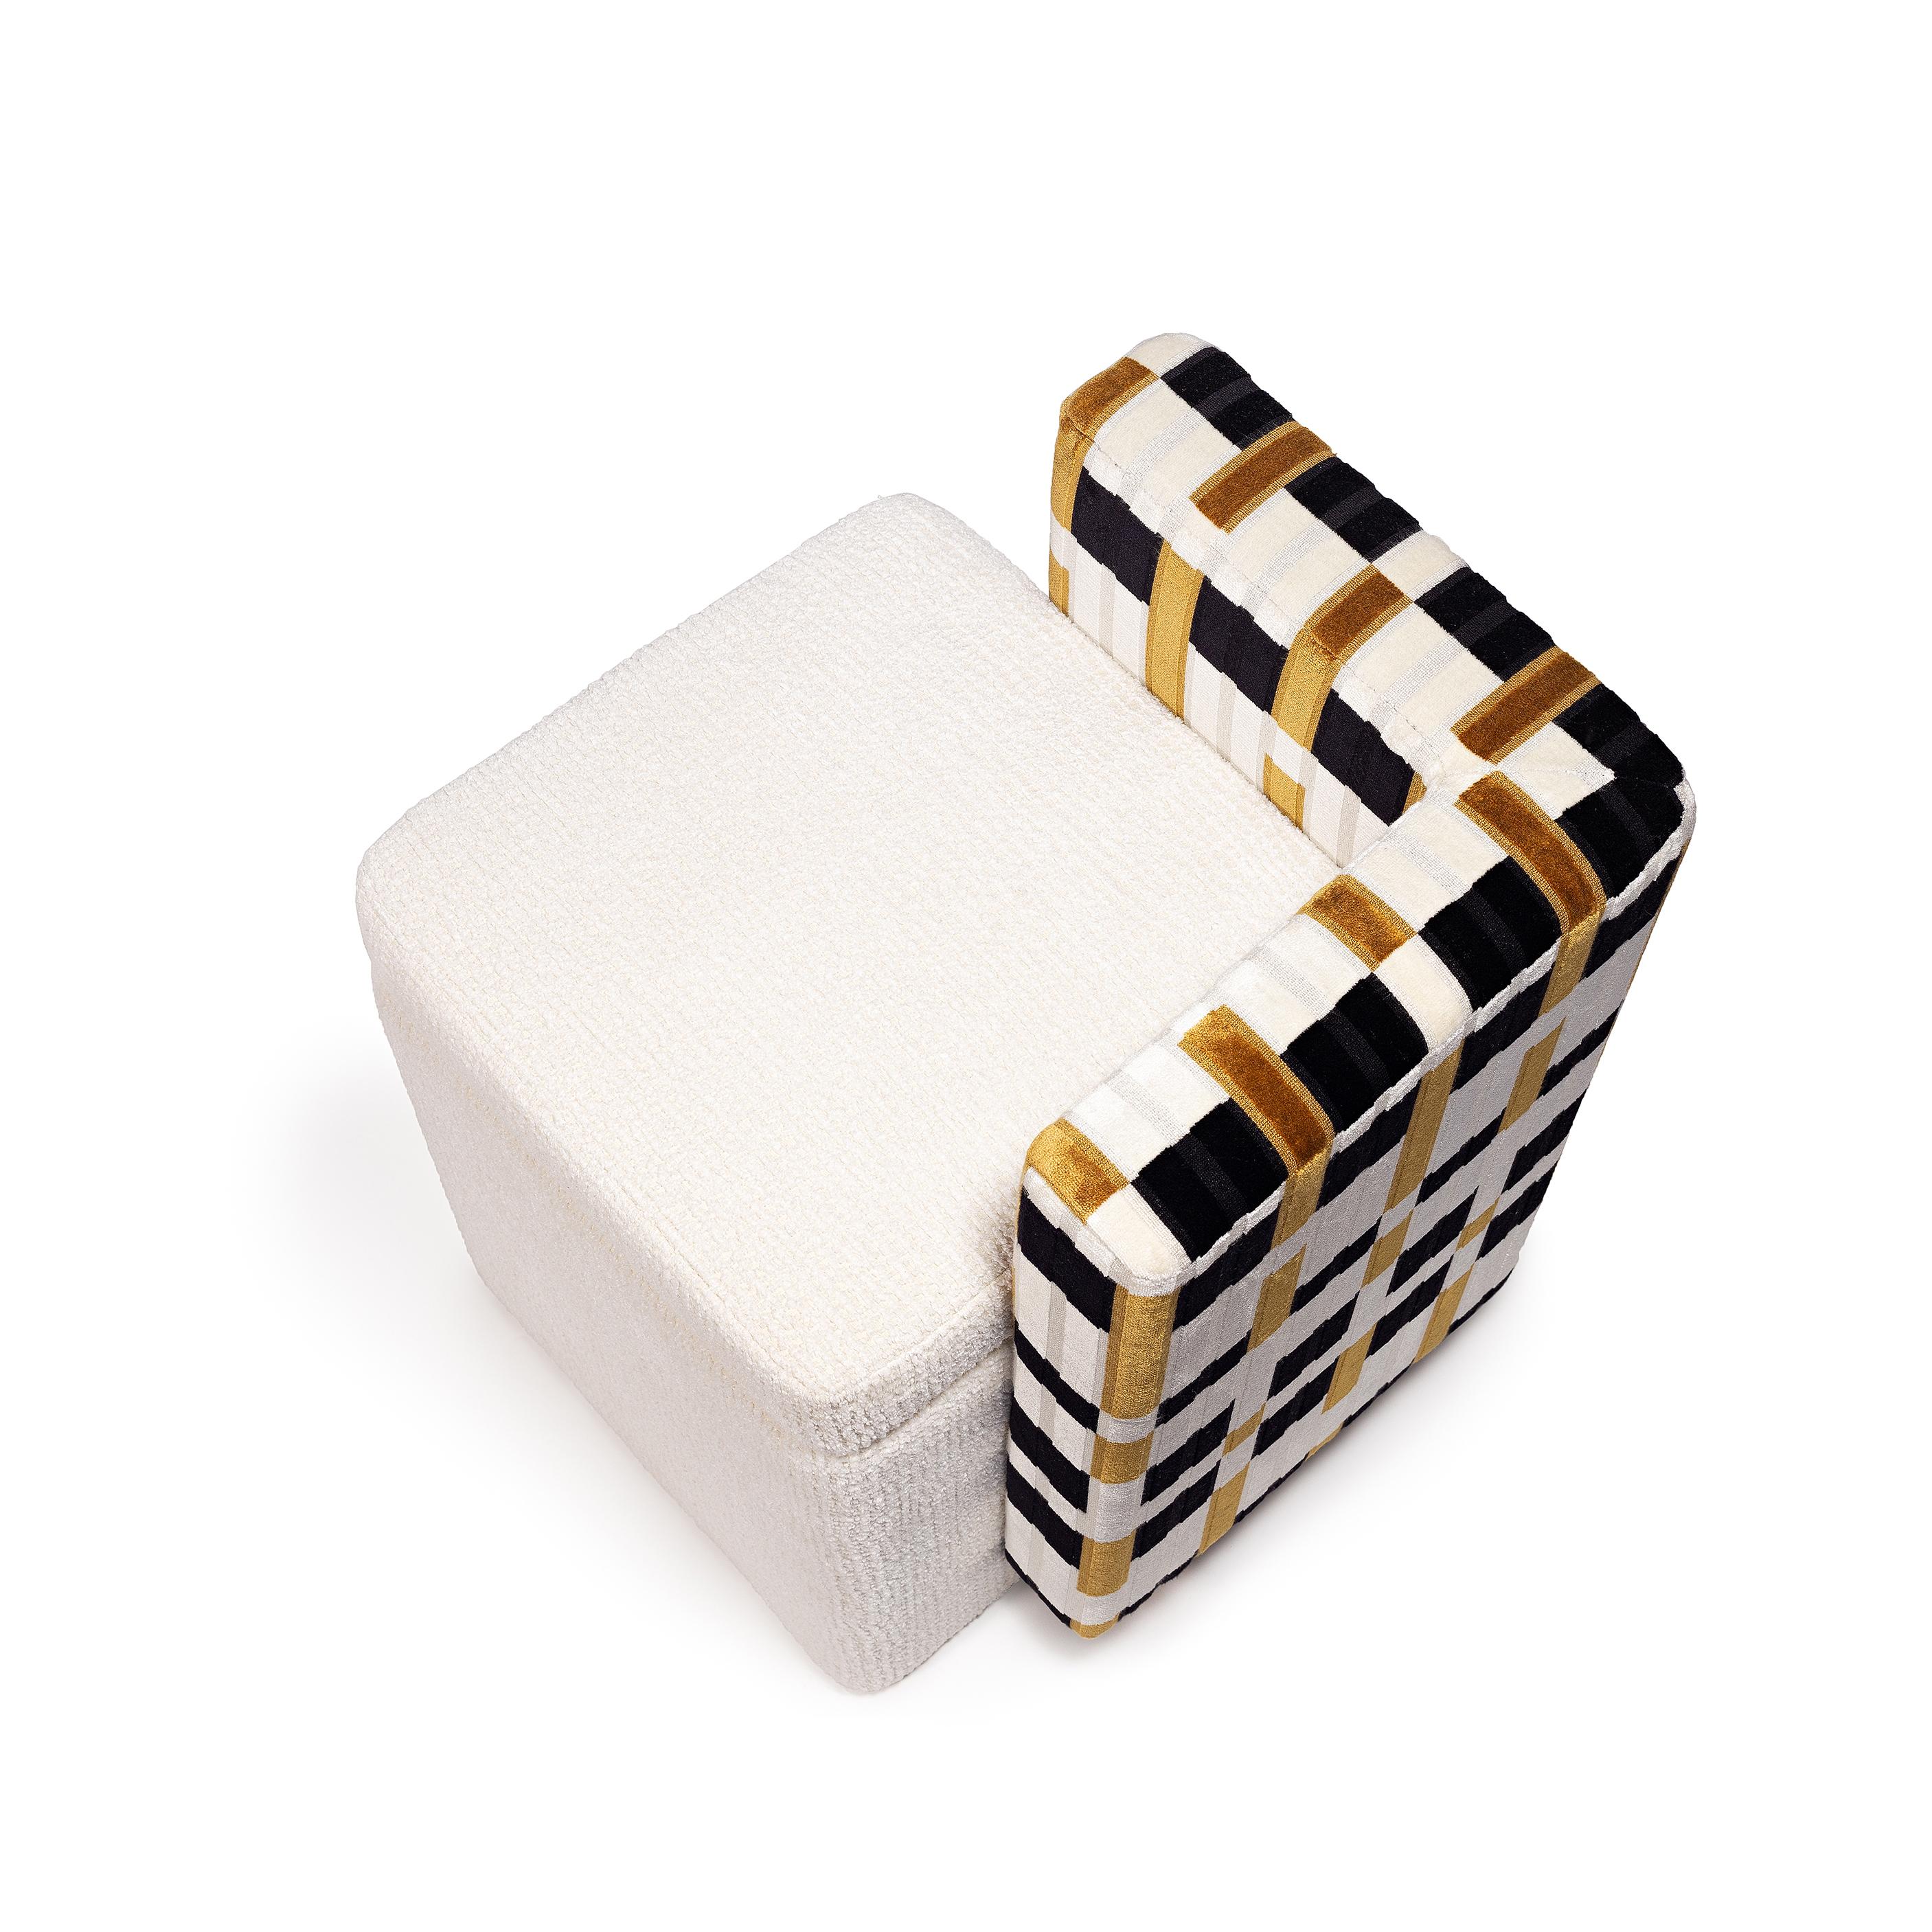 Contemporary Not a Cube Stool, InsidherLand by Joana Santos Barbosa For Sale